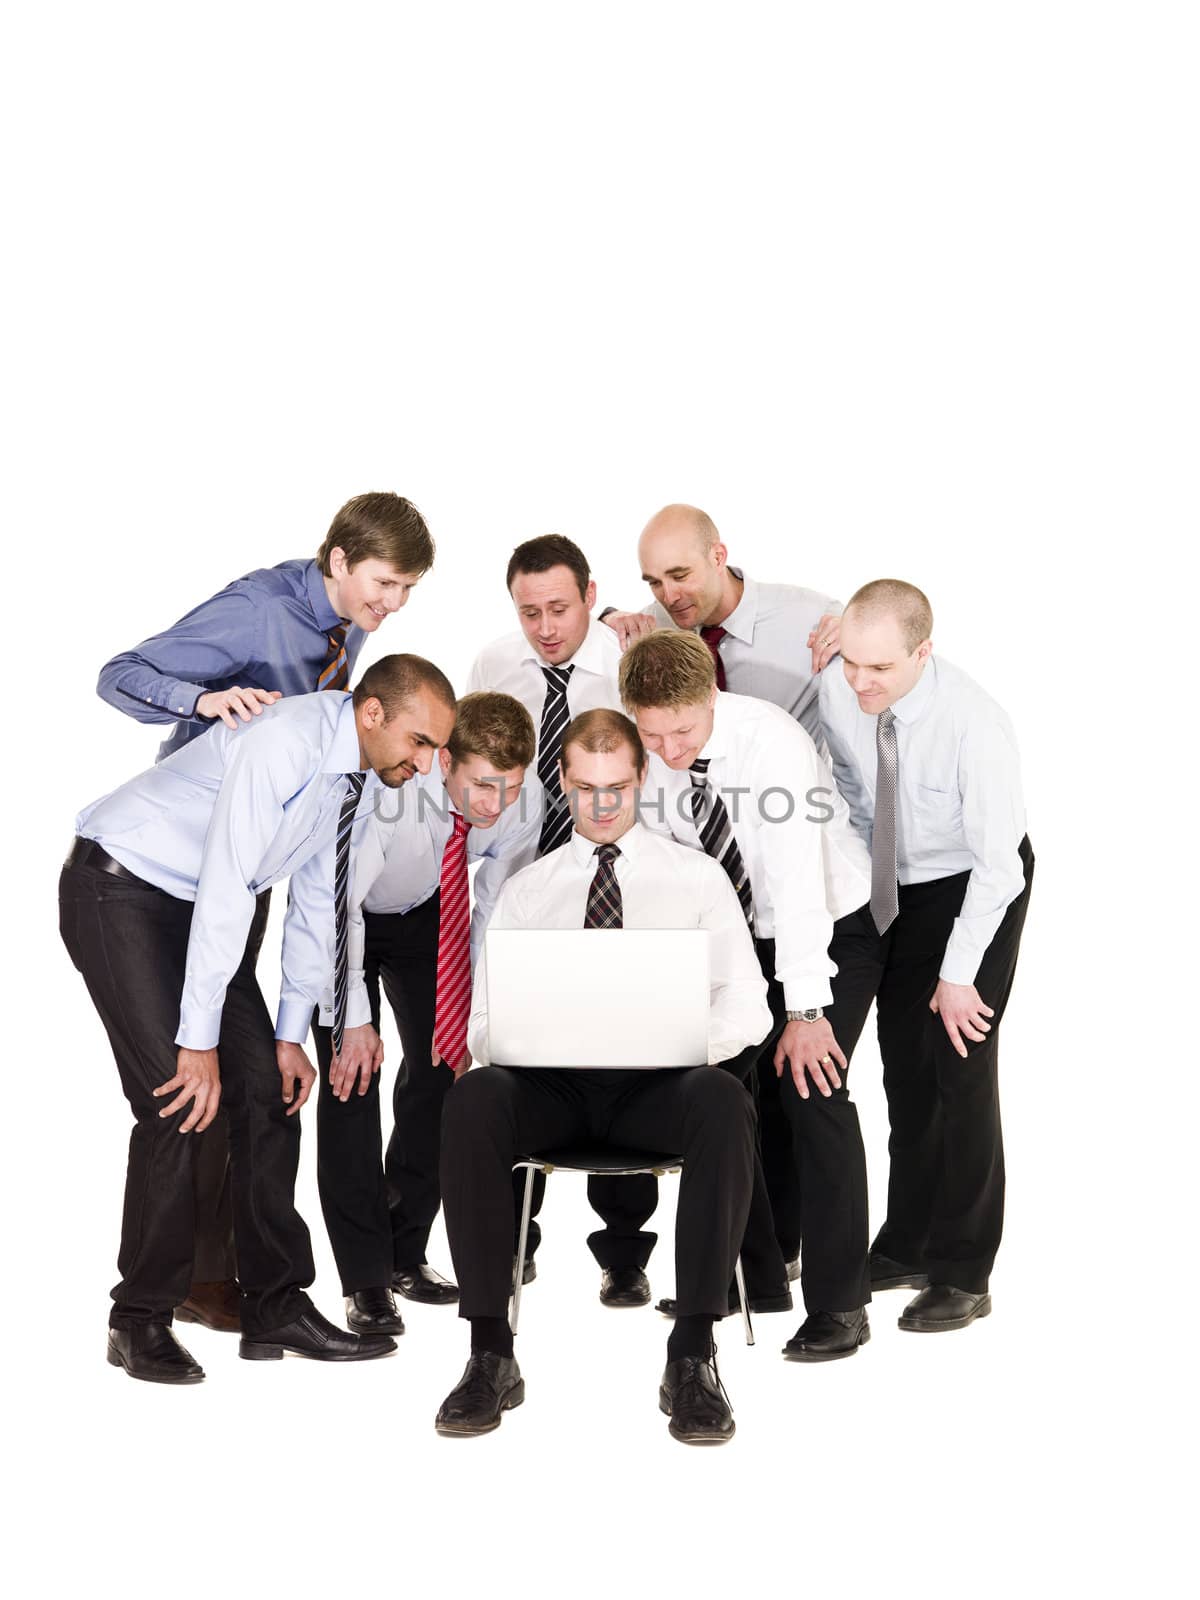 Group of businessmen in front of a laptop isolated on white background